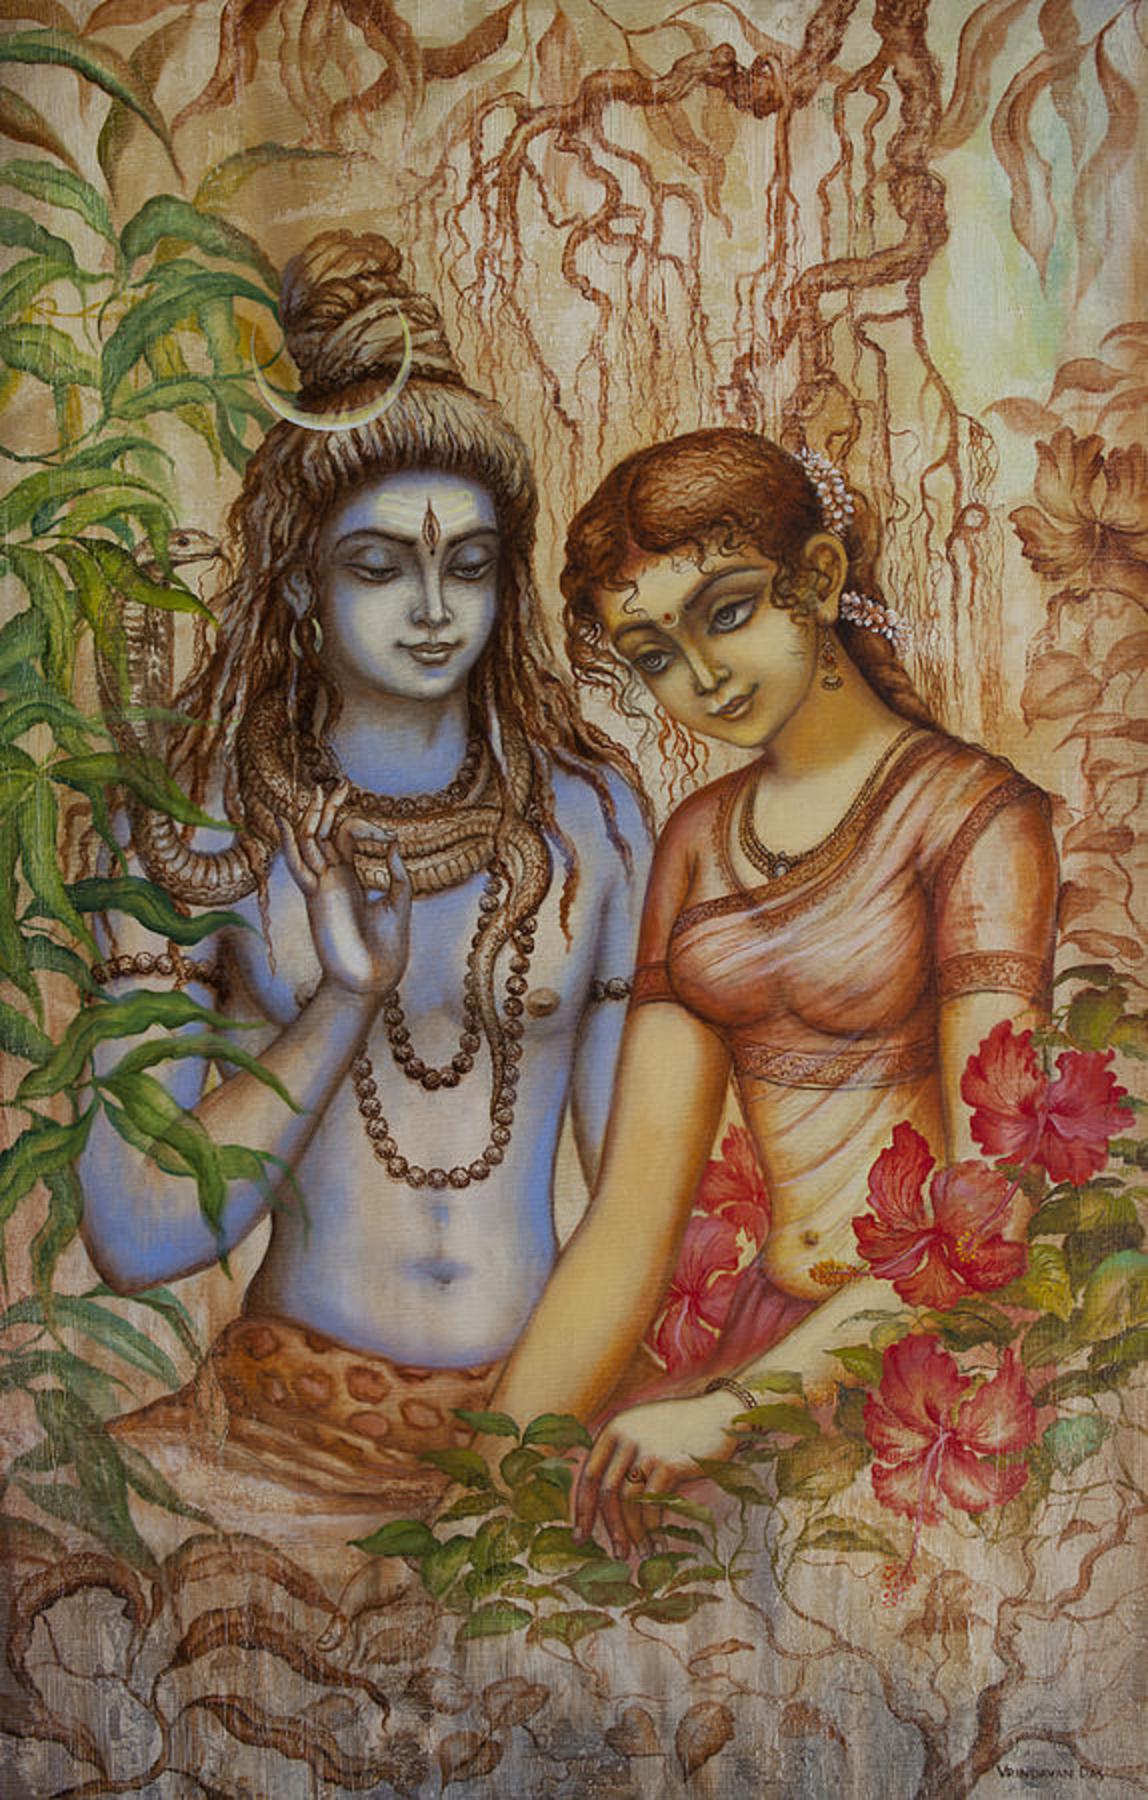 Shiva And Parvati S Eternal Love In Pics The gods (different forms of one faceless supreme god) remained chaste and were free of lust, as they were centered in infinite incomparable bliss at all times, and did not need to resort to physical union in order to get bliss. shiva and parvati s eternal love in pics